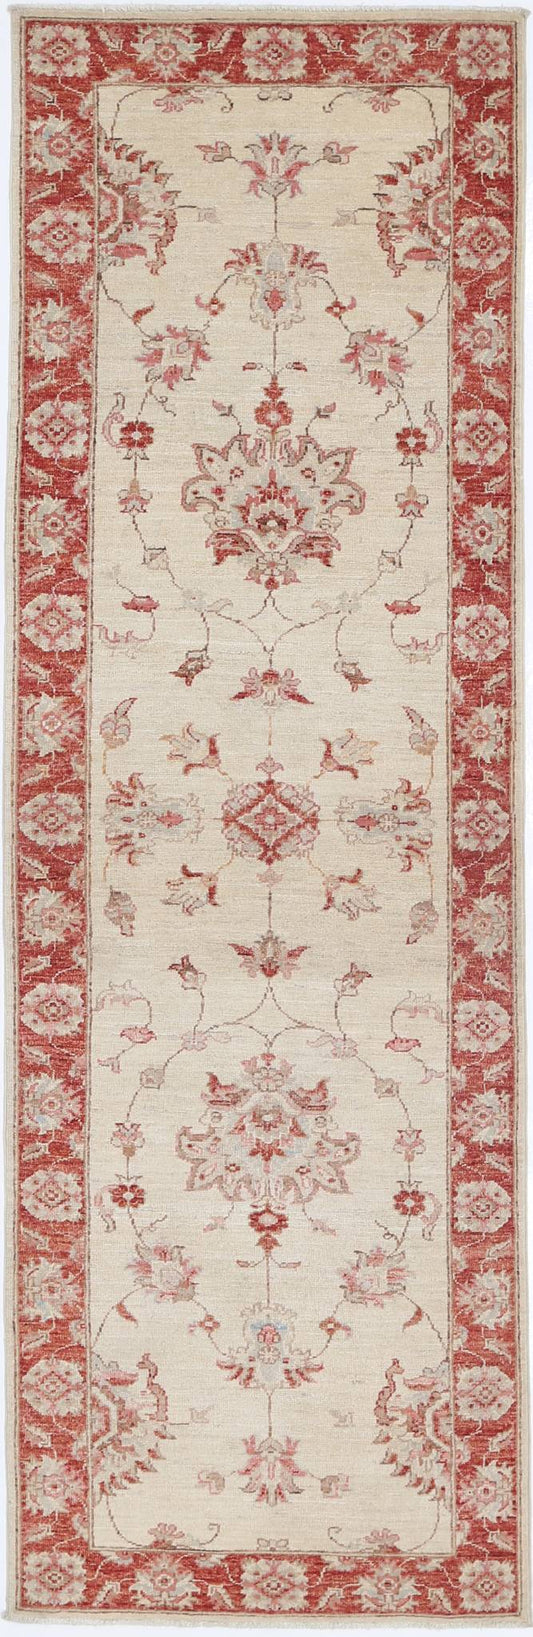 Traditional Hand Knotted Ziegler Farhan Wool Rug of Size 2'6'' X 8'4'' in Ivory and Red Colors - Made in Afghanistan